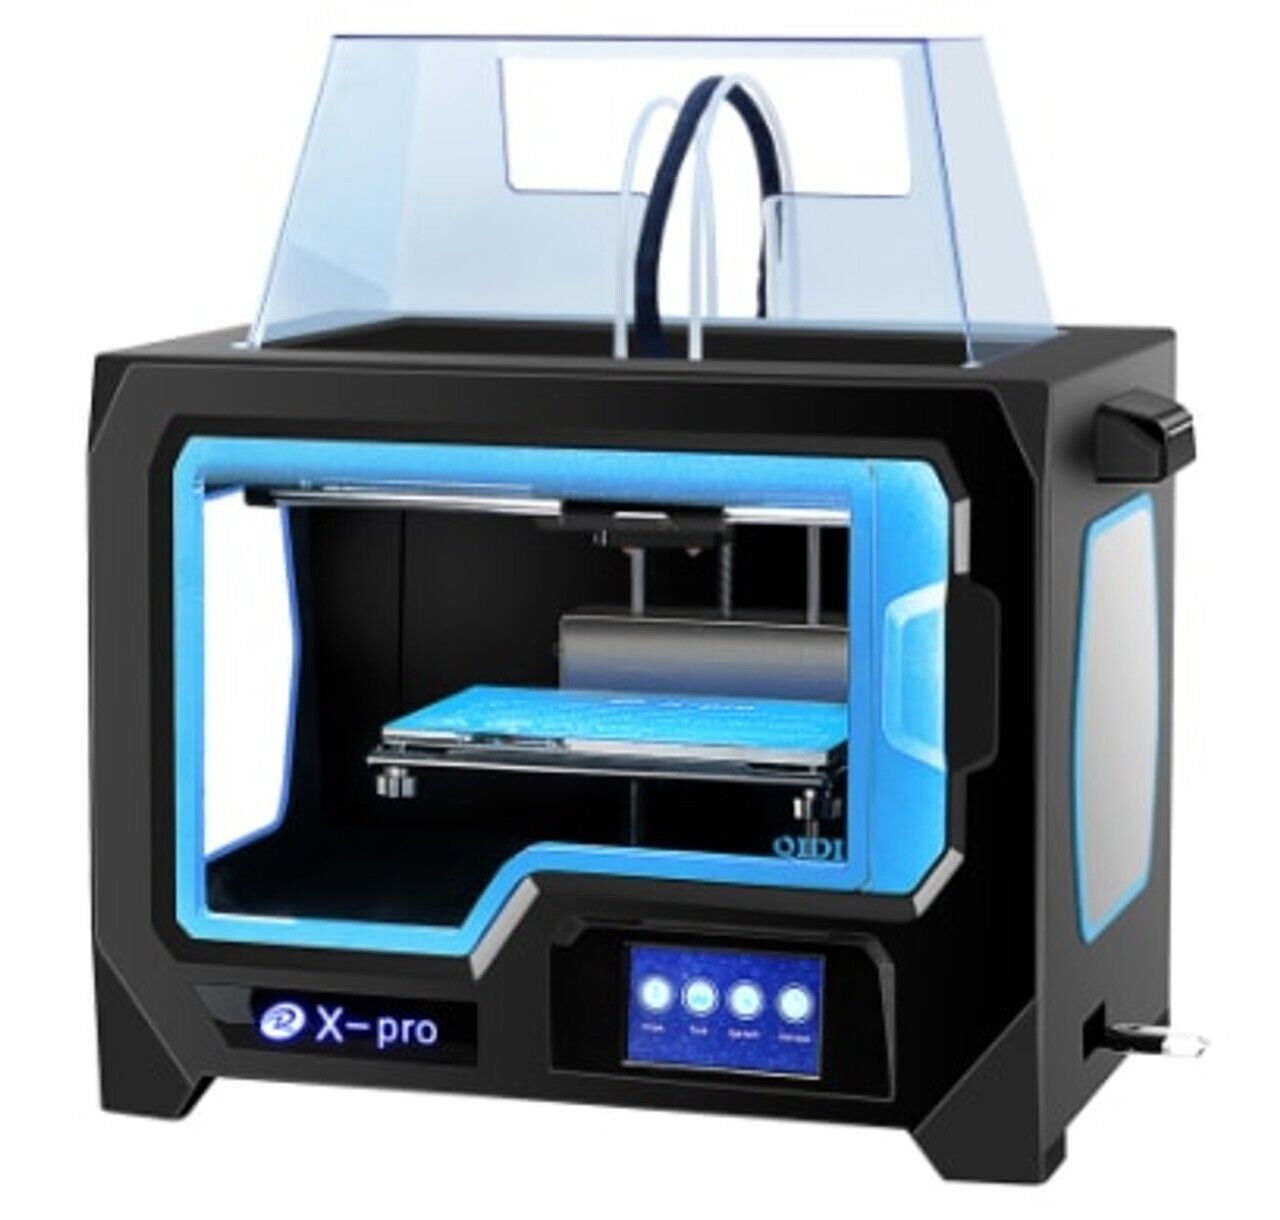 QIDI TECH Dual Extruder X Pro 3D Printer with WiFi print with ABS,PLA,TPU|3D